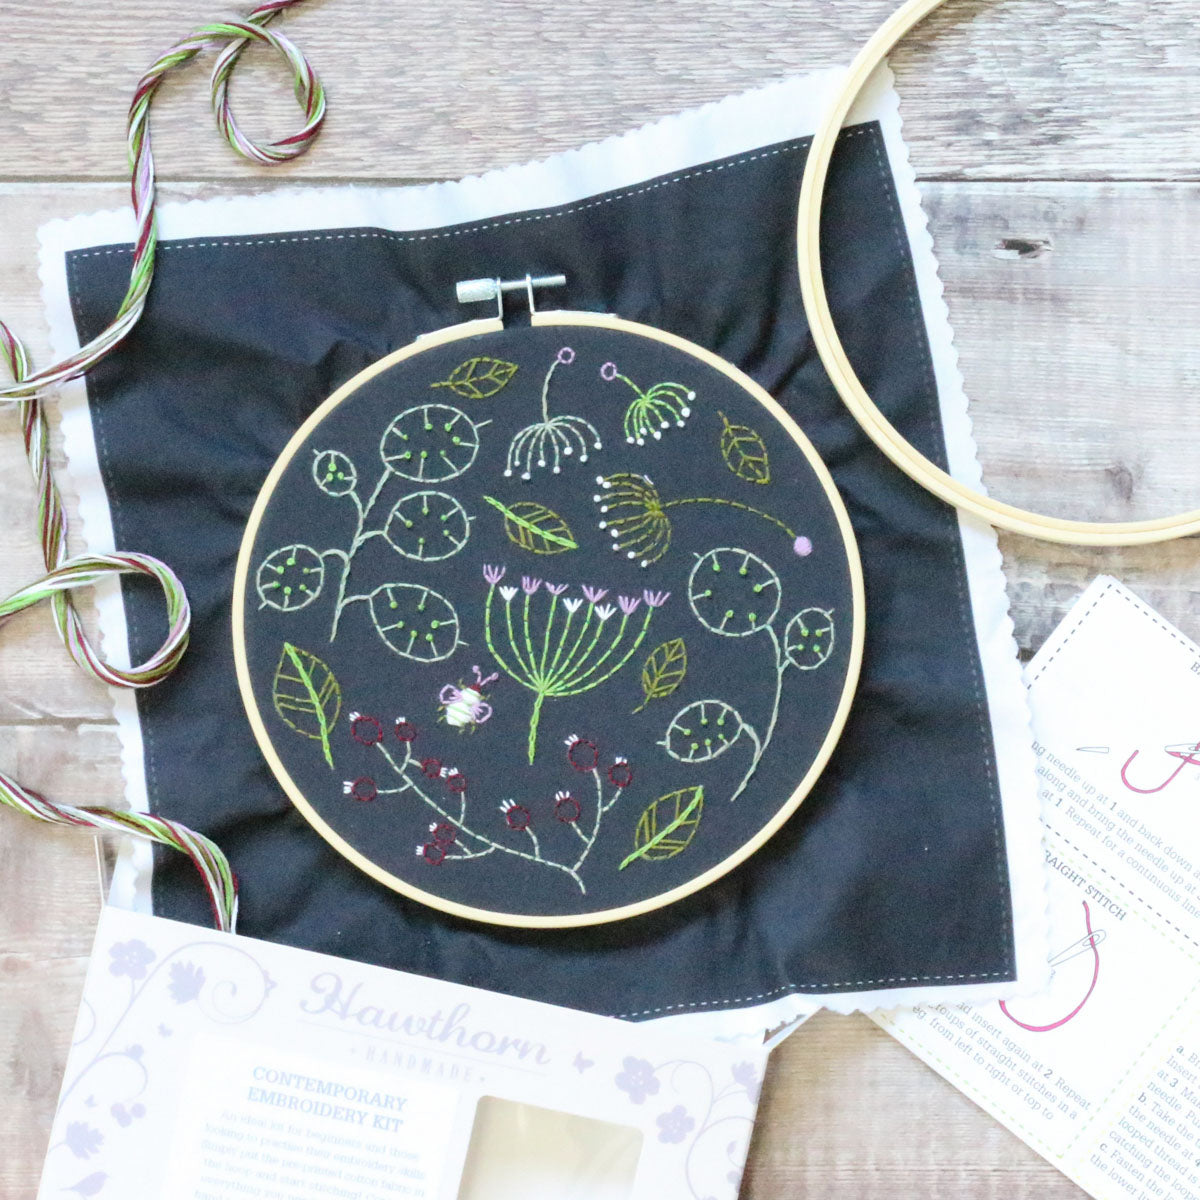 Child's Beginner Embroidery Kit by Stitched Stories, 7 in, Cotton